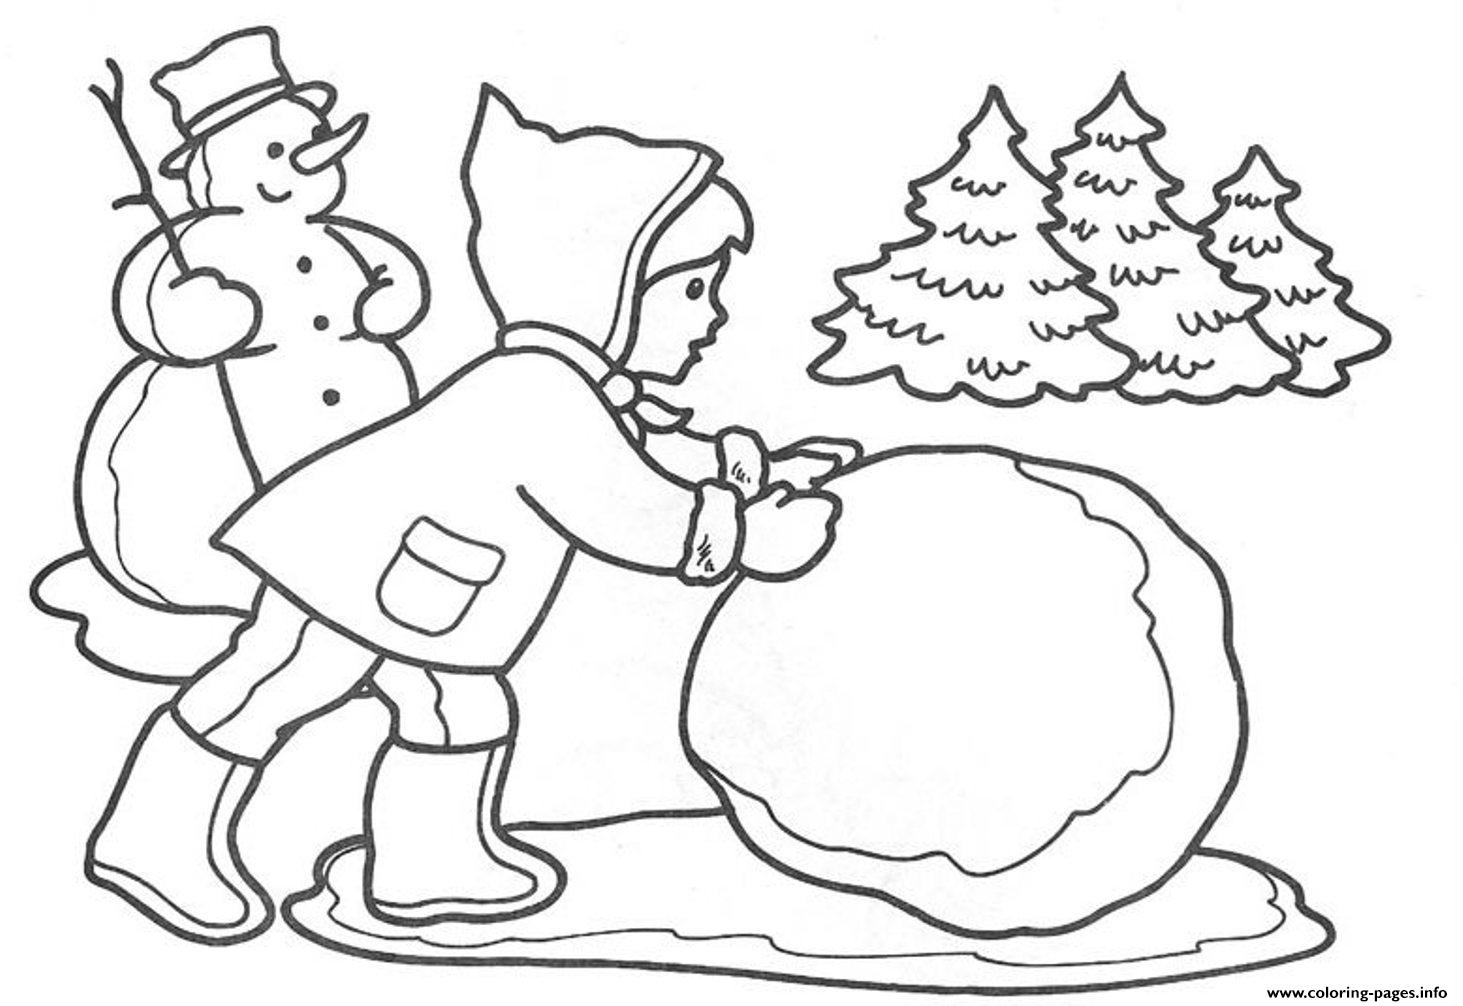 Making Snowball Winter S For Kids4ec1 coloring